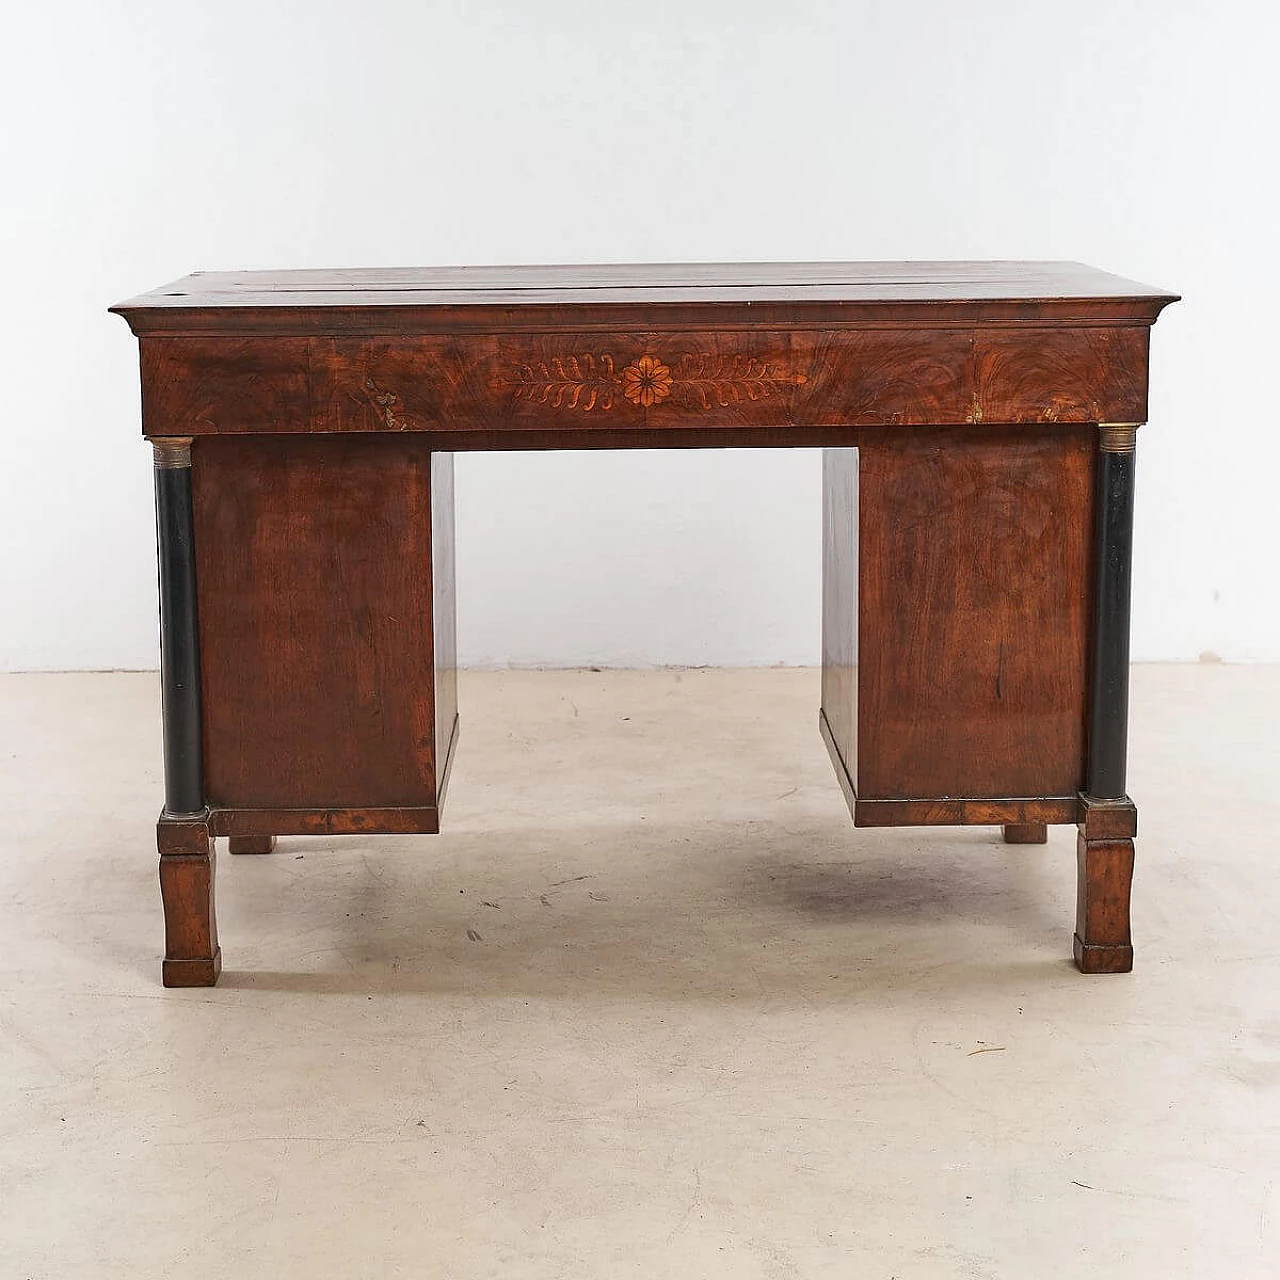 Empire-style panelled and inlaid wooden center desk, 19th century 10